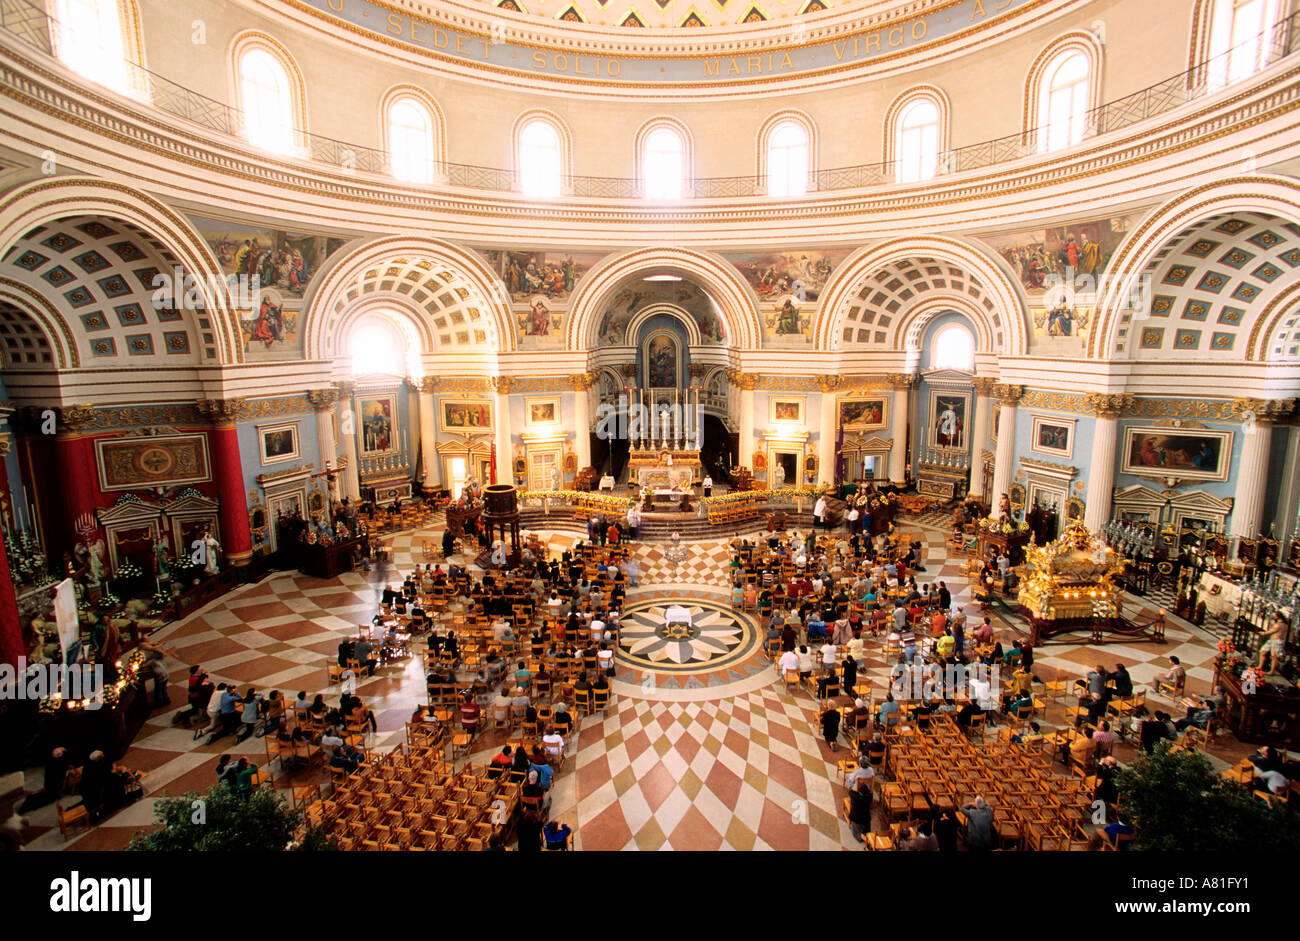 Malta, mass in the church Saint Mary of Mosta inspired by the Pantheon of Rome, Stock Photo